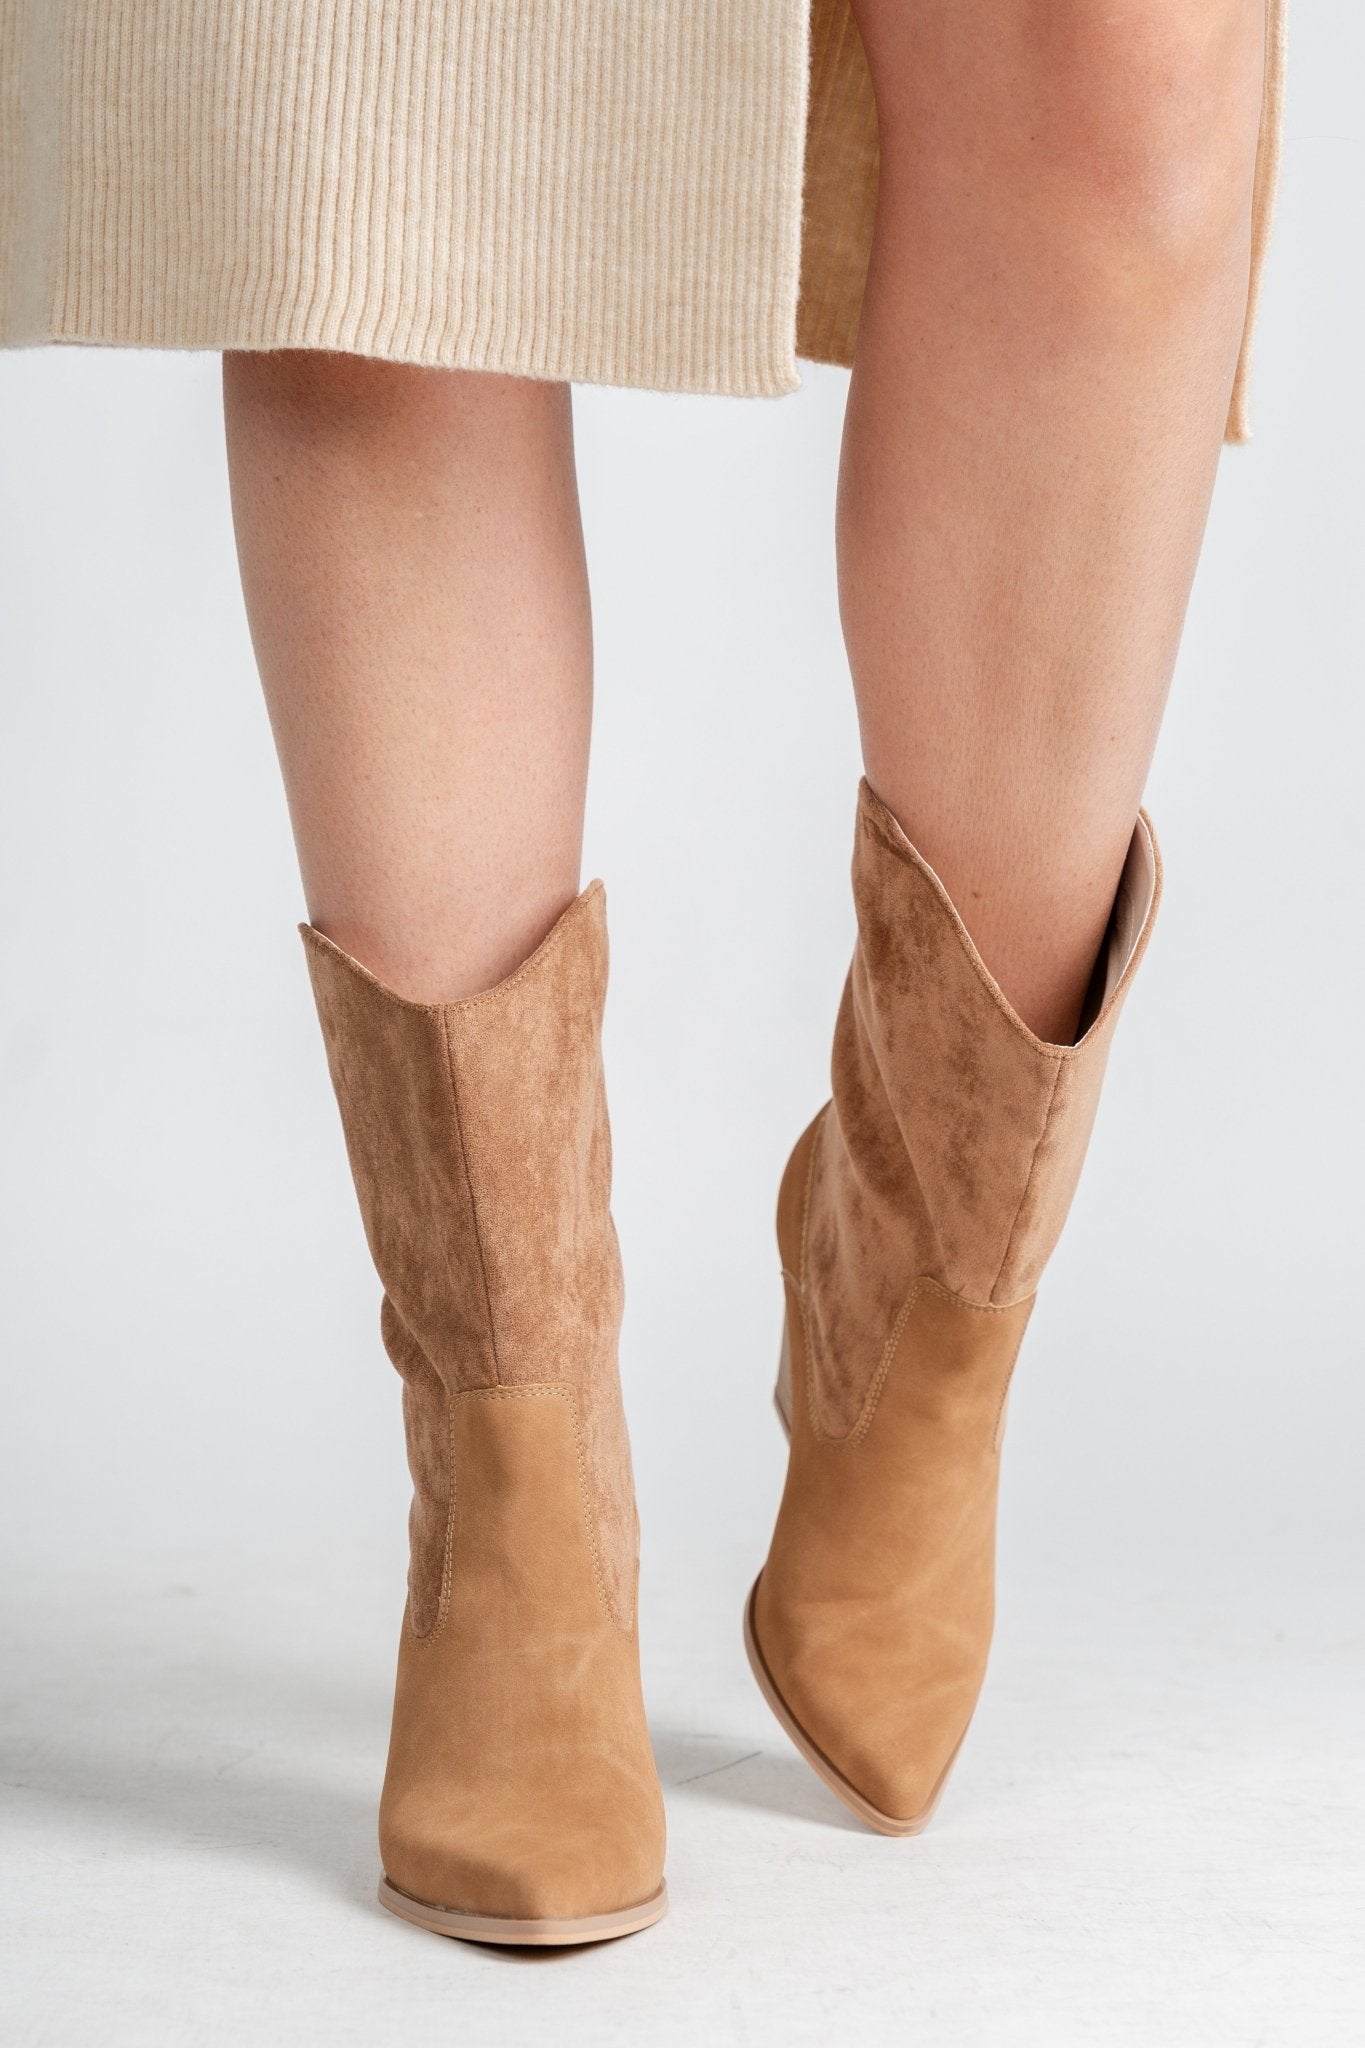 Marseille loose fit boot camel - Trendy shoes - Fashion Shoes at Lush Fashion Lounge Boutique in Oklahoma City